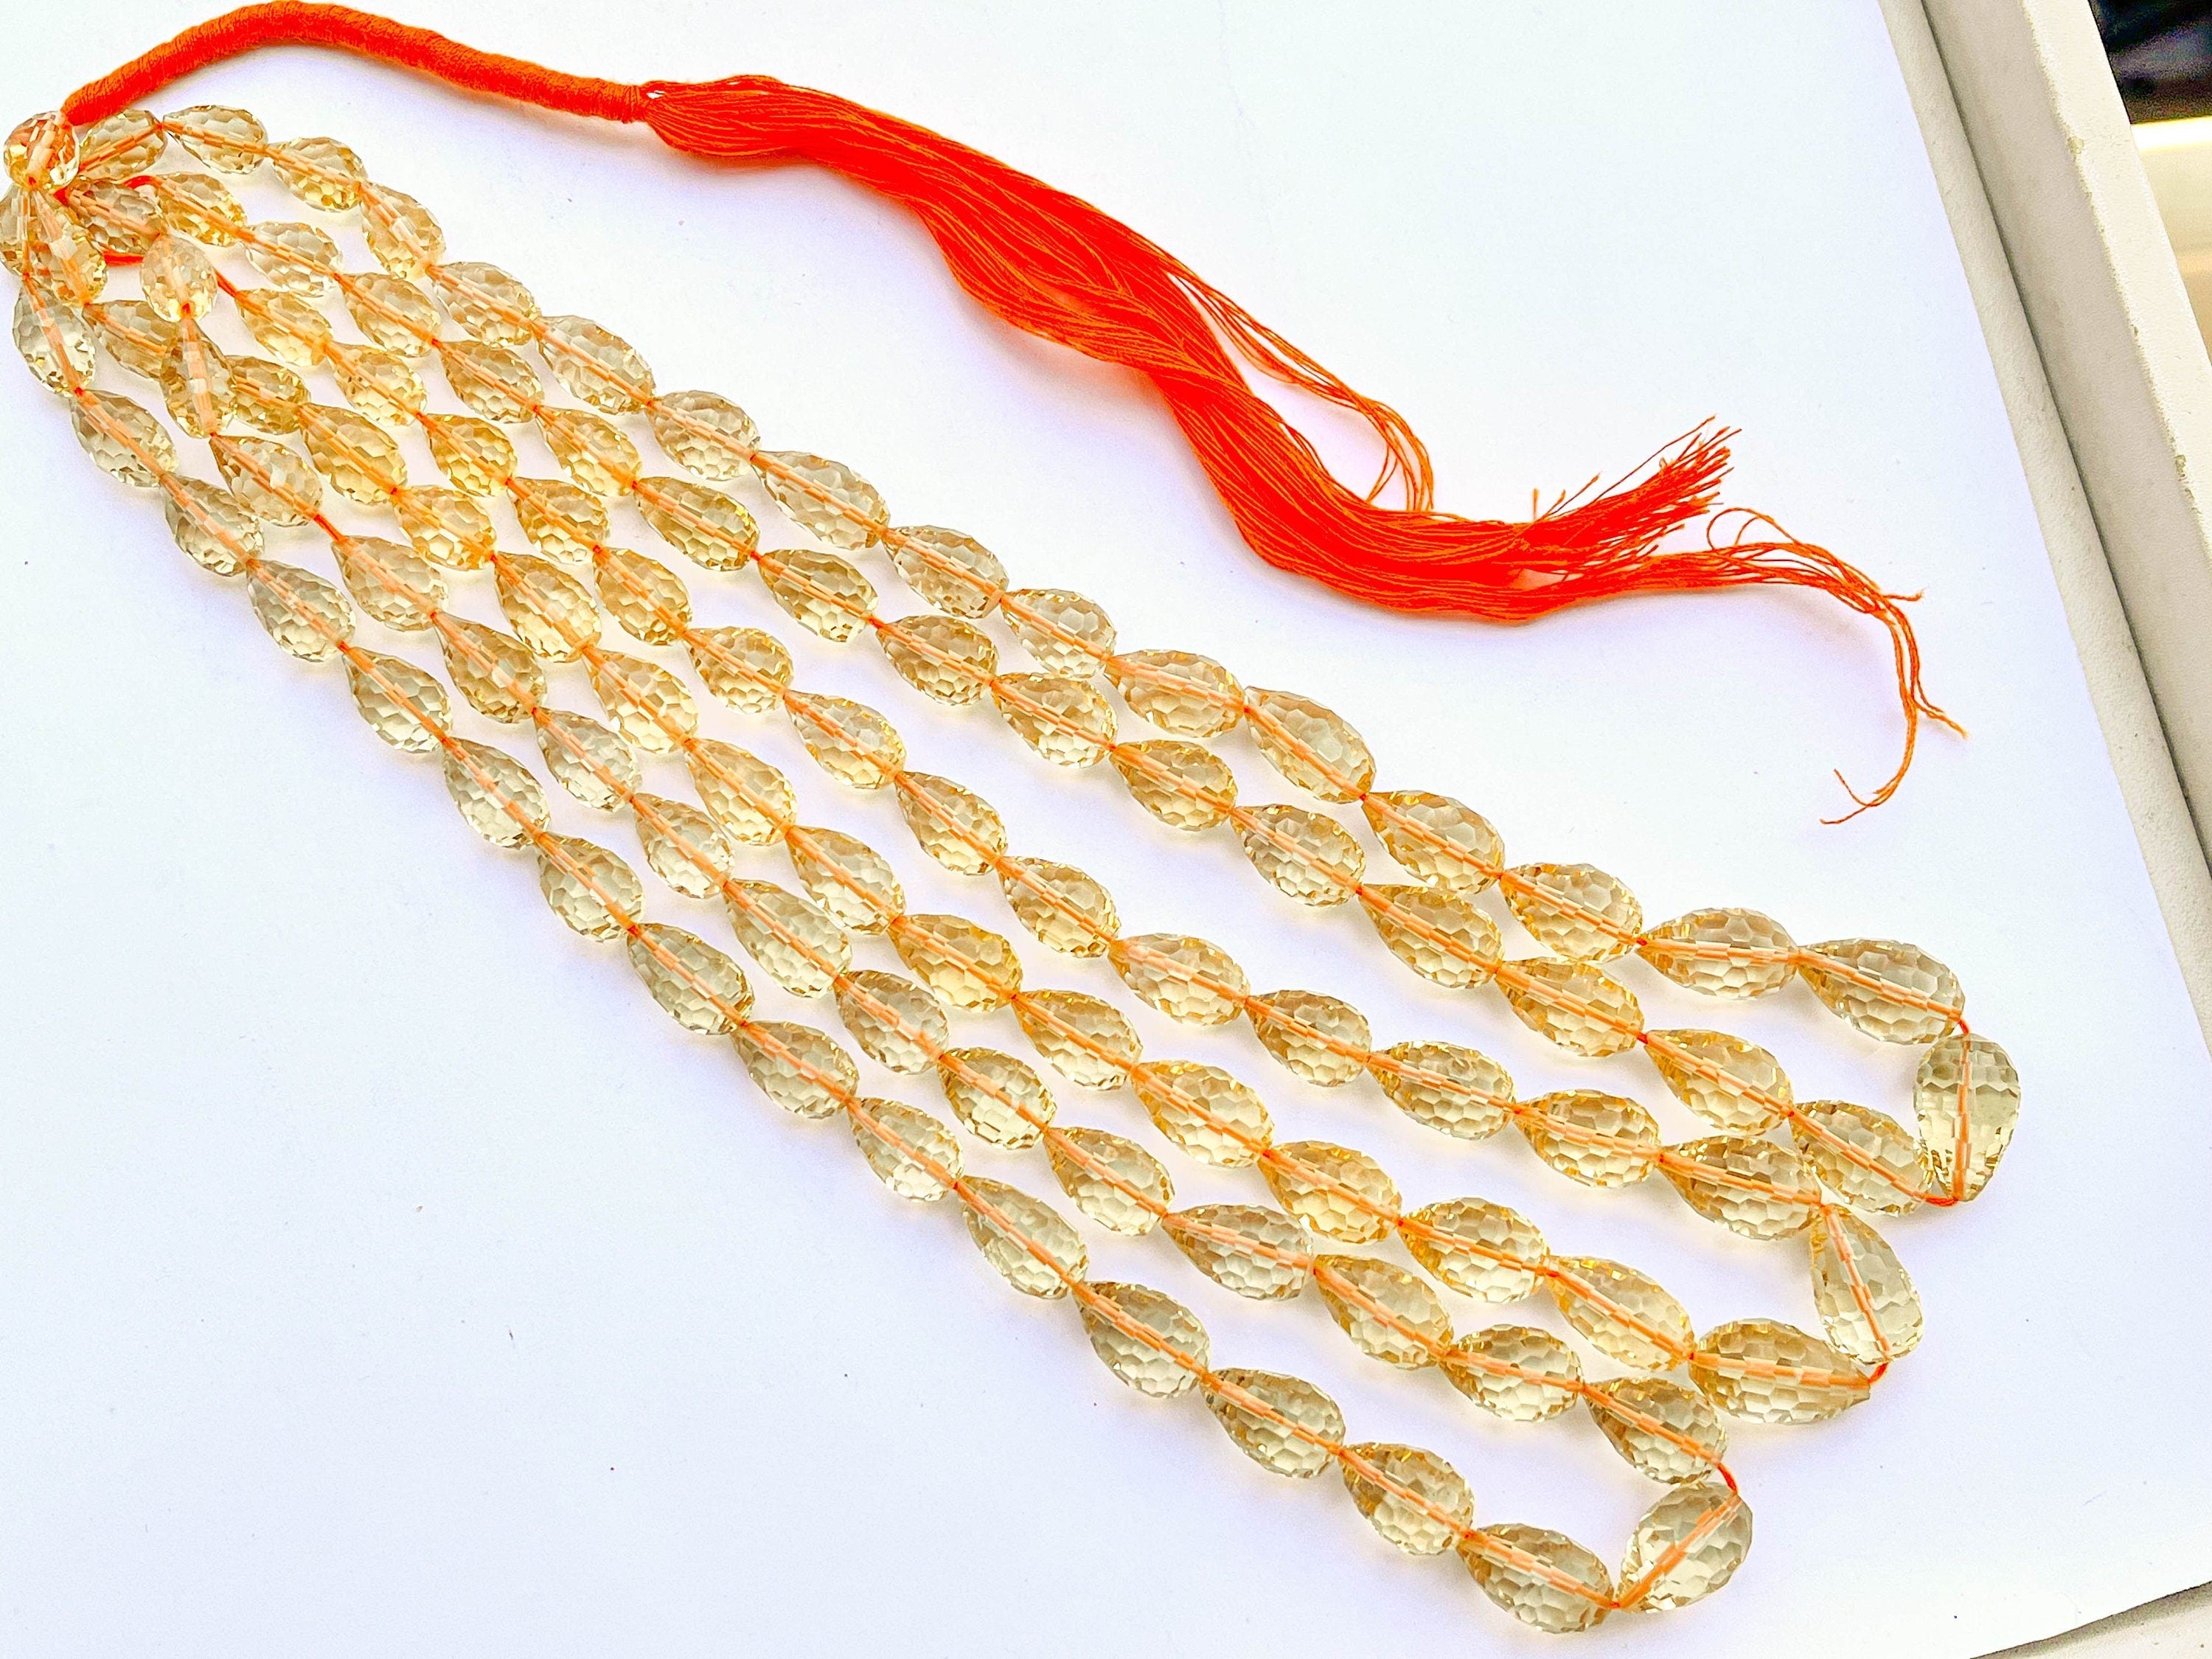 Citrine Concave Cut Drops, Natural Gemstone Beads, 7x11mm to 9x15mm, 16 Inches String, 32 Pieces, Center Drill Beadsforyourjewelry